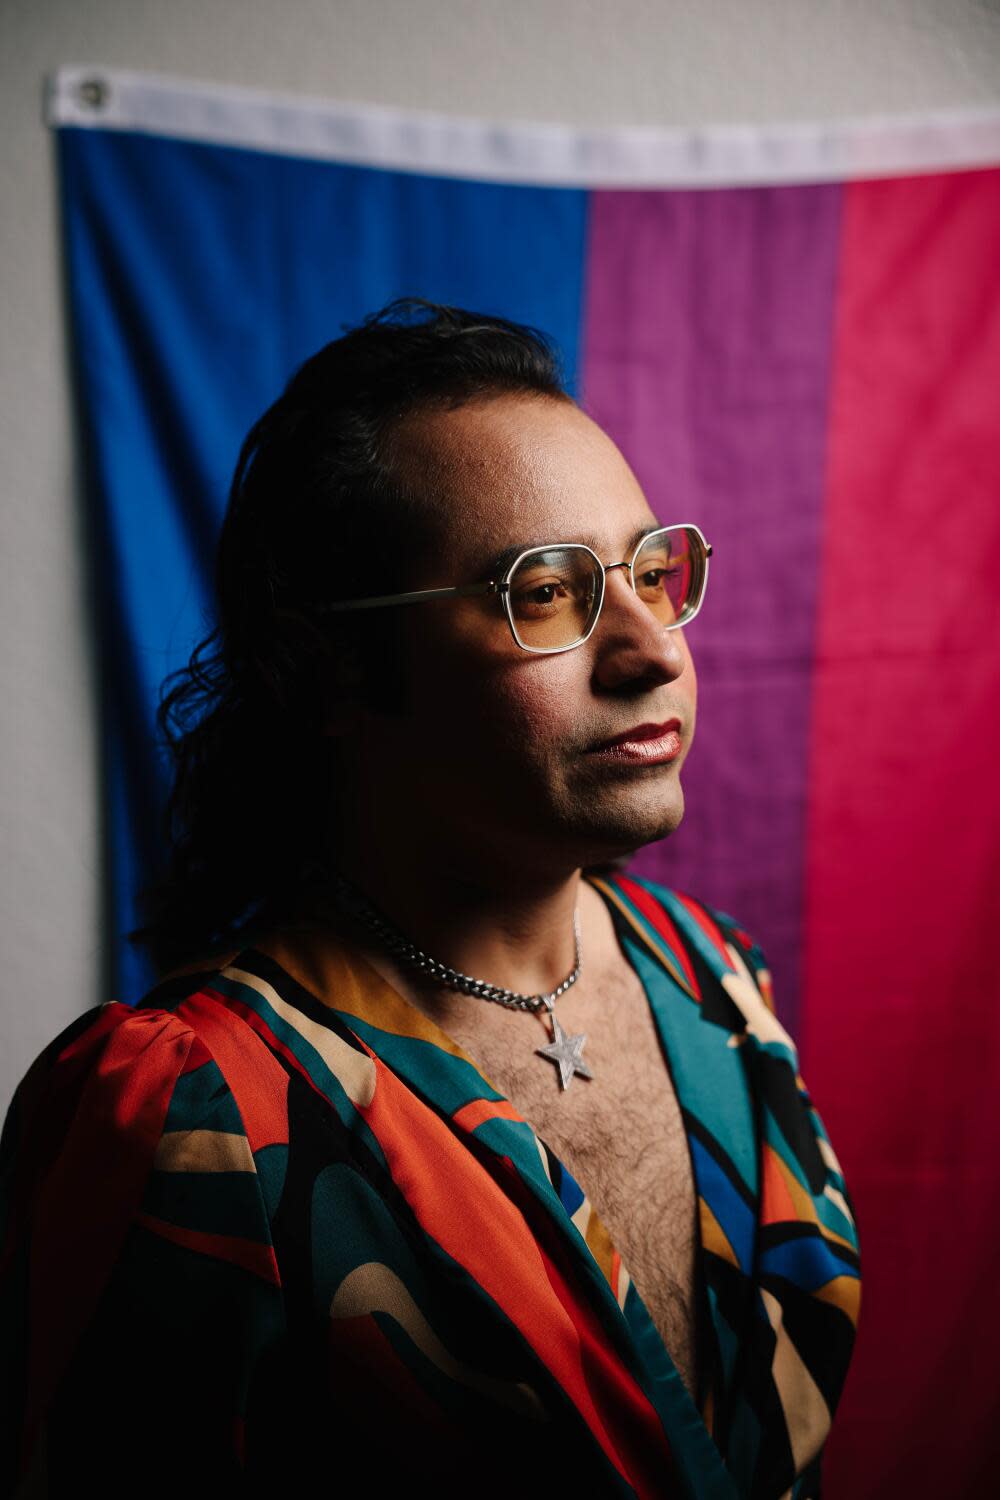 Raul Urena poses for a portrait in front of a rainbow flag.